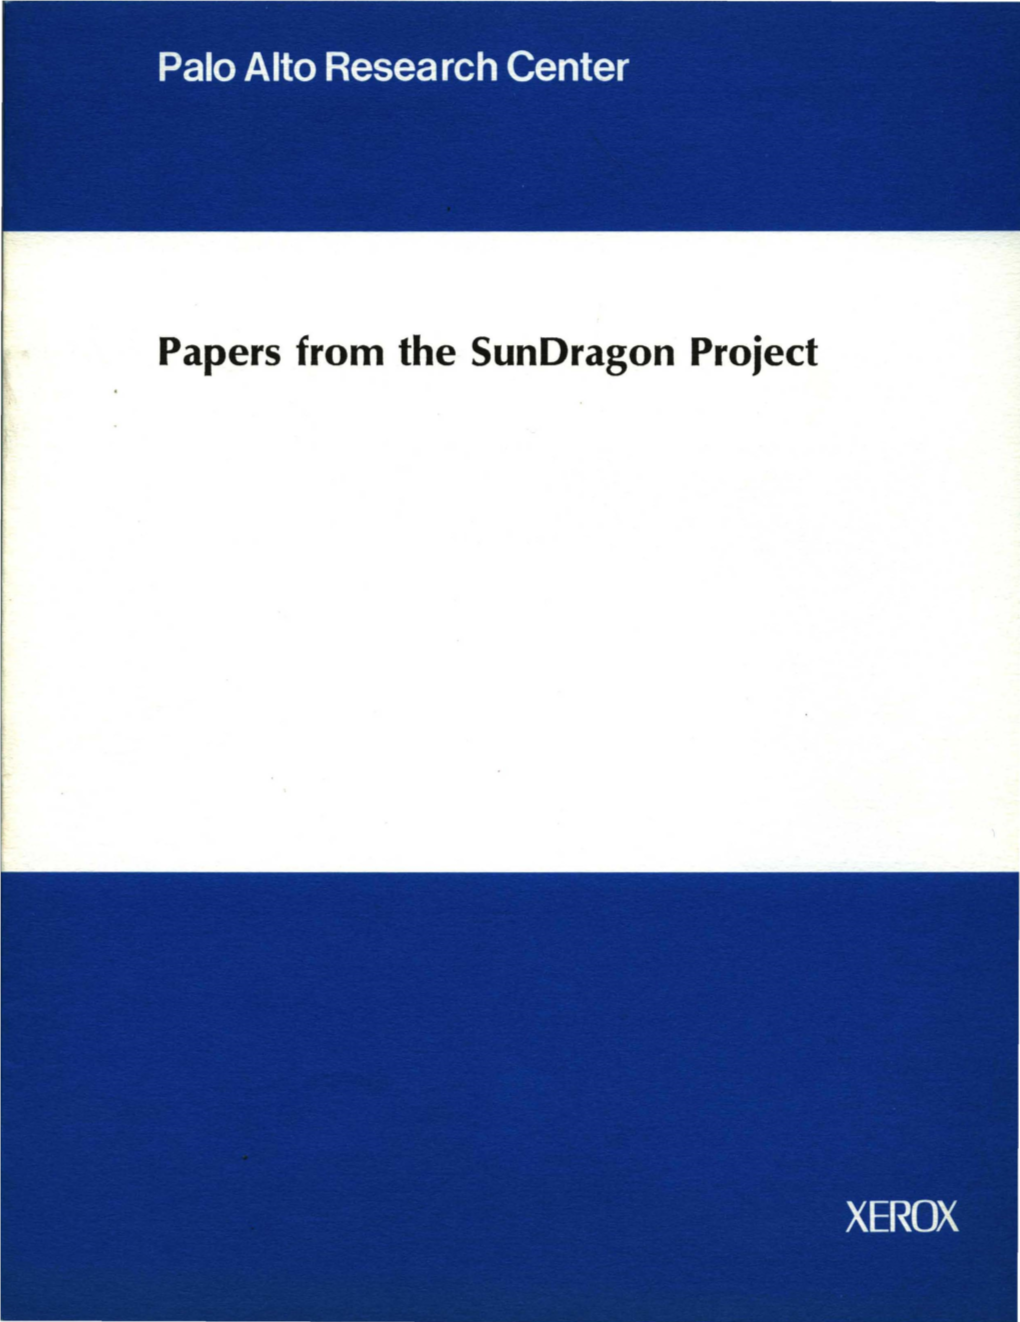 Xerox PARC CSL-93-17 "Papers from the Sundragon Project"